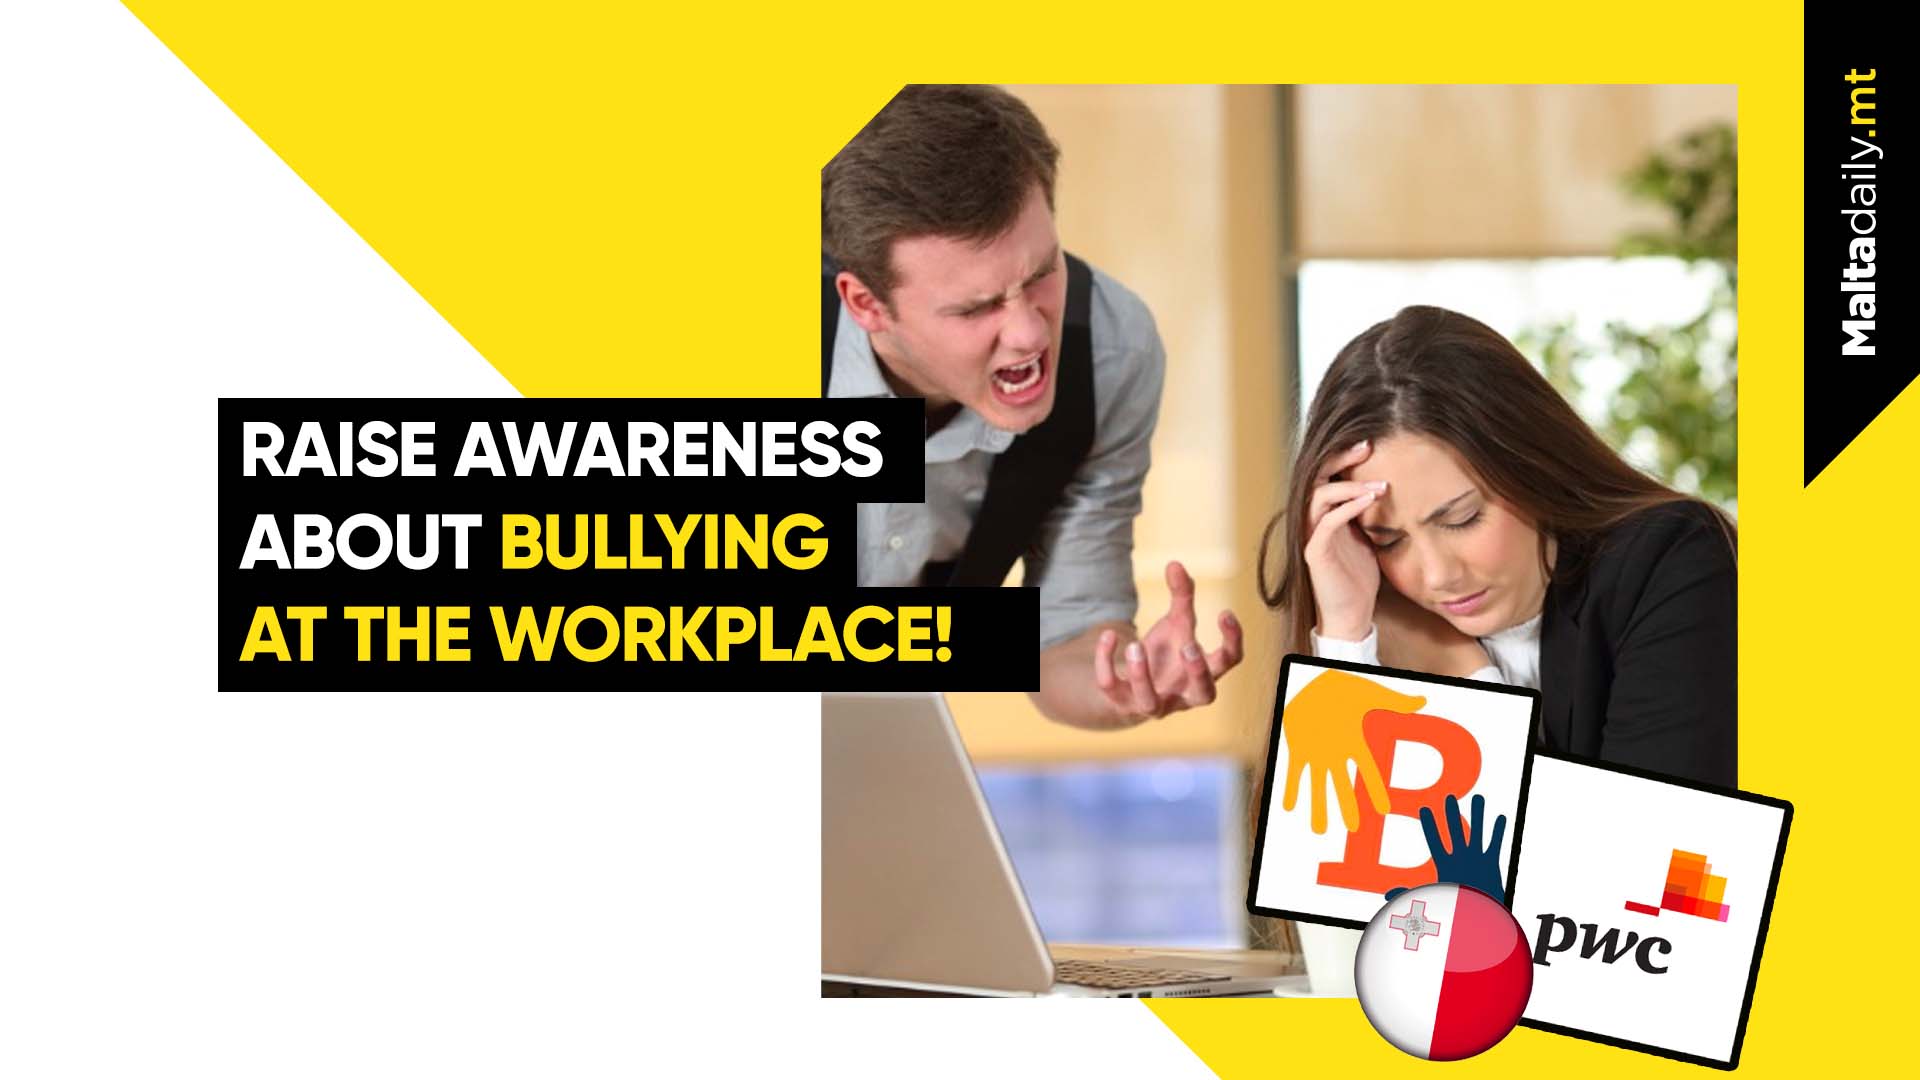 Raise awareness on bullying at the workplace with new survey